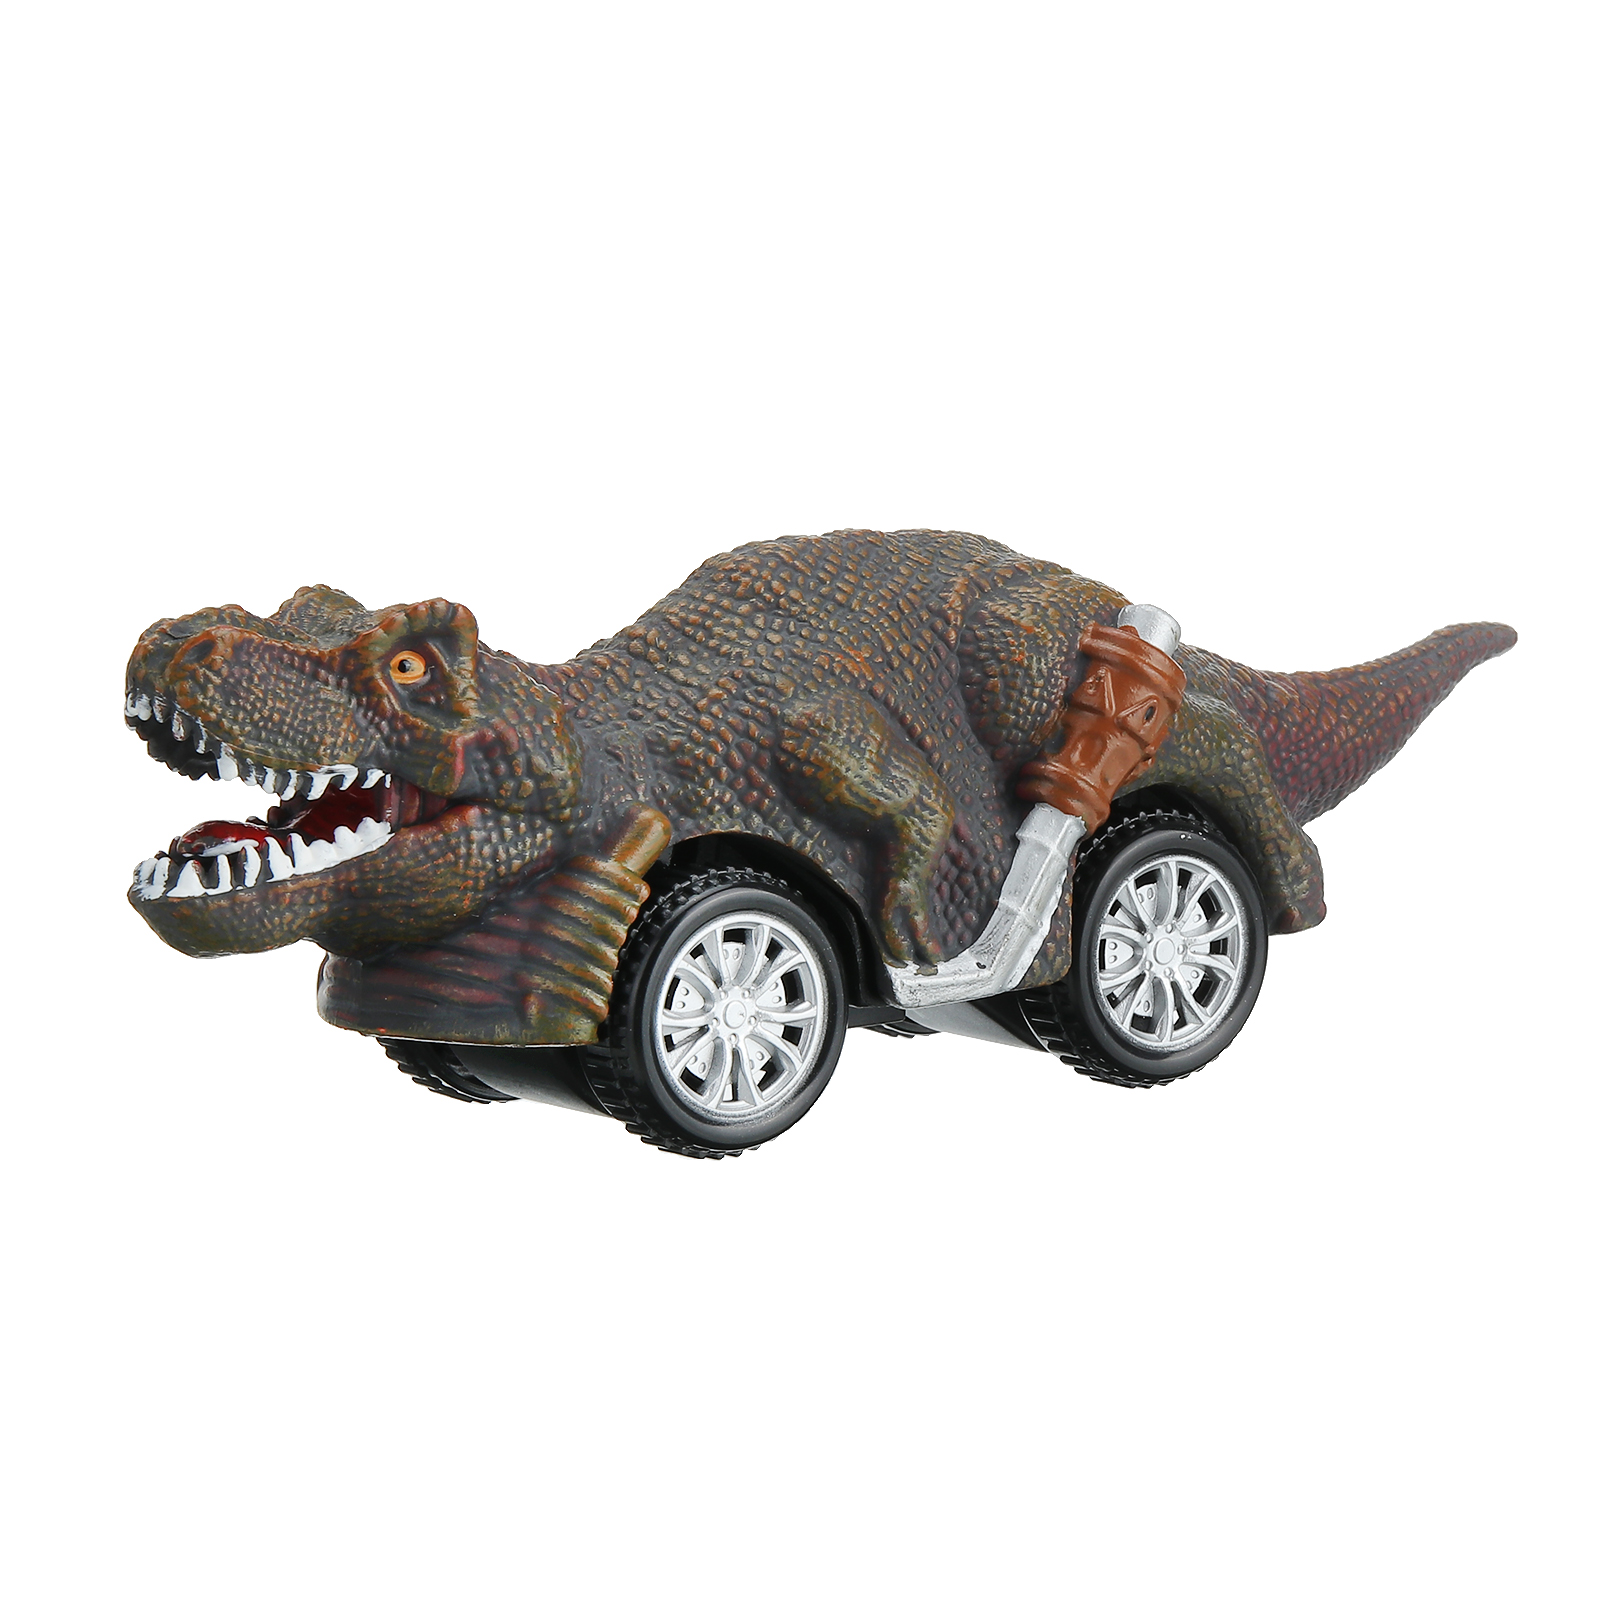 Pickwoo-Dinosaur-Toys-Cars-Inertia-Vehicles-Toddlers-Kids-Dinosaur-Party-Games-with-T-Rex-Dino-Toys--1895631-15